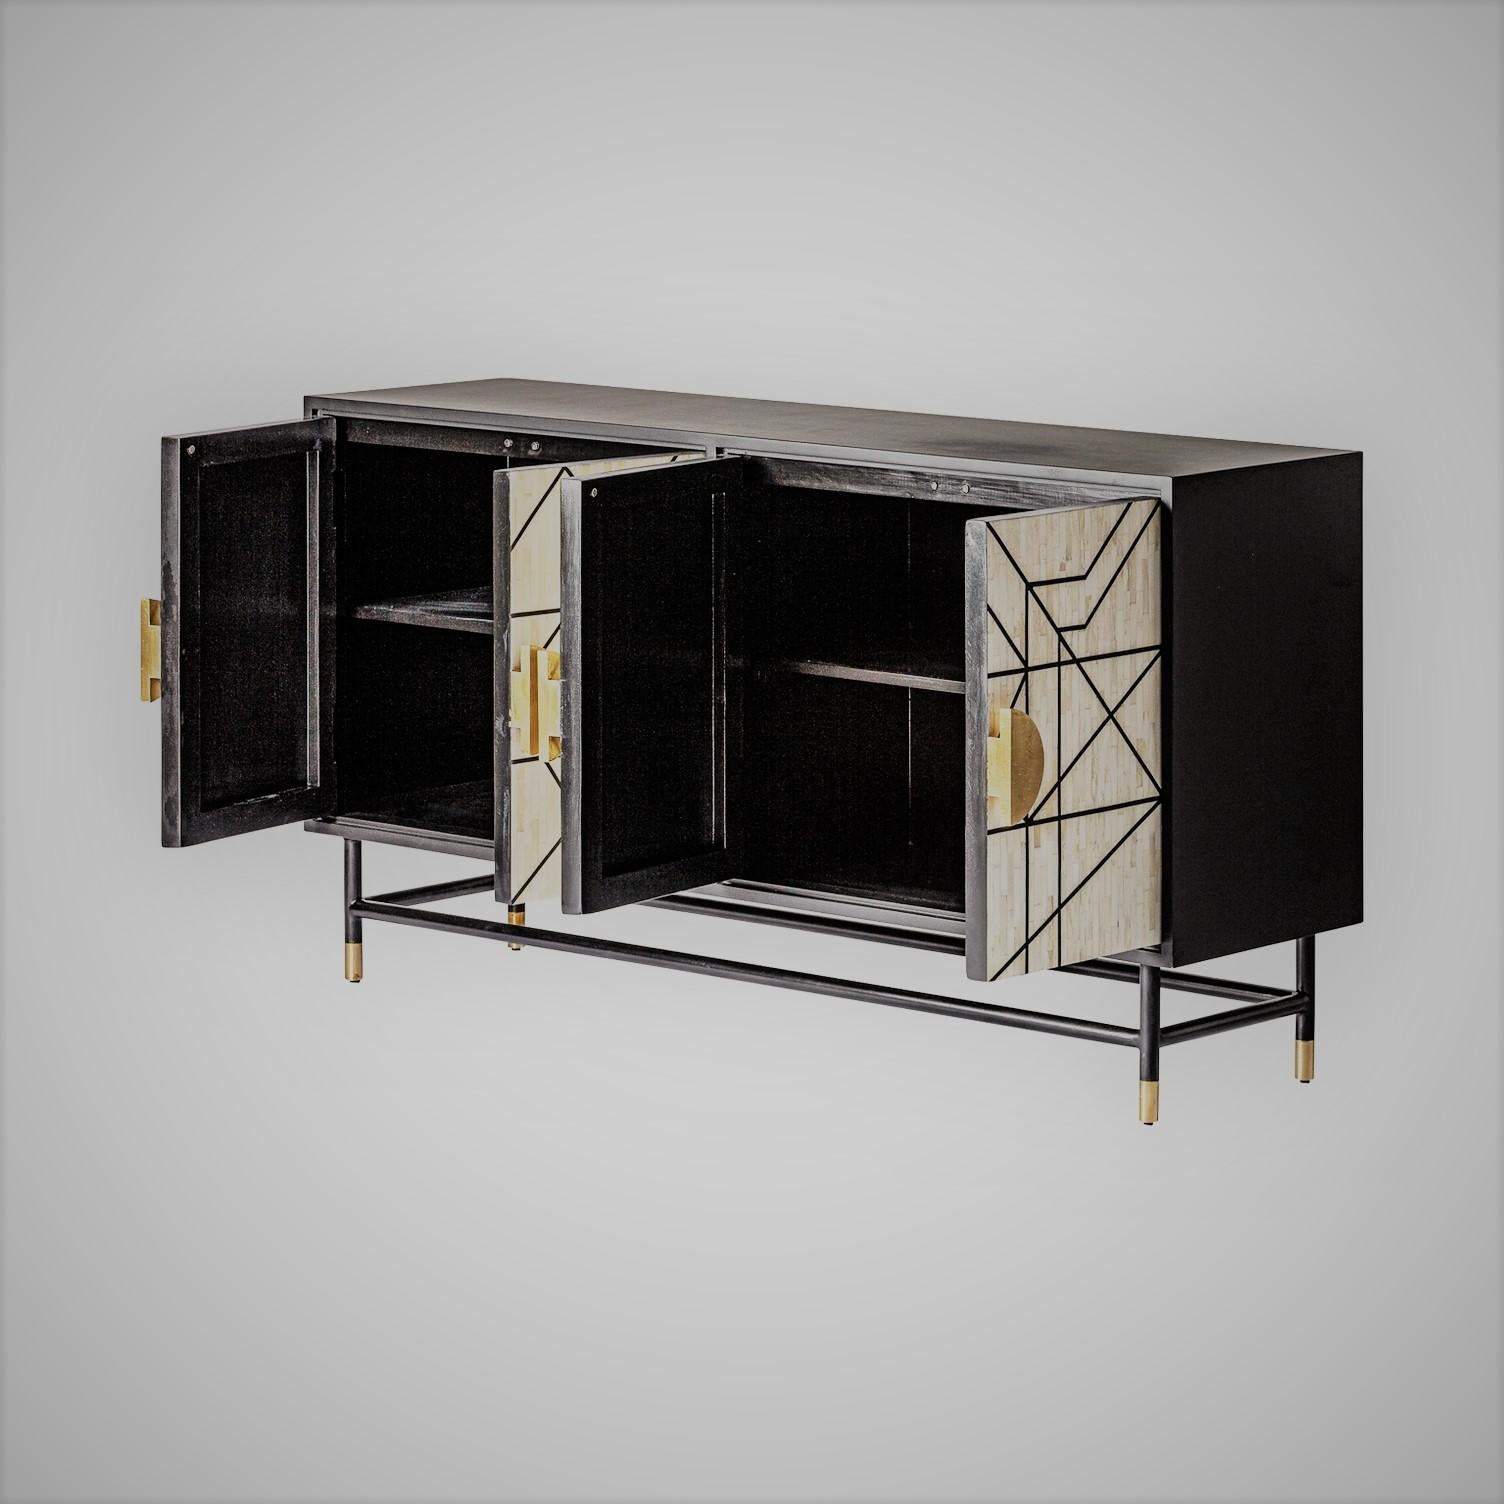 Italian Design and Memphis style black and white sideboard composed of black lacquered iron base, black lacquered wooden, graphic door panels opening on shelves, and brass finishes.